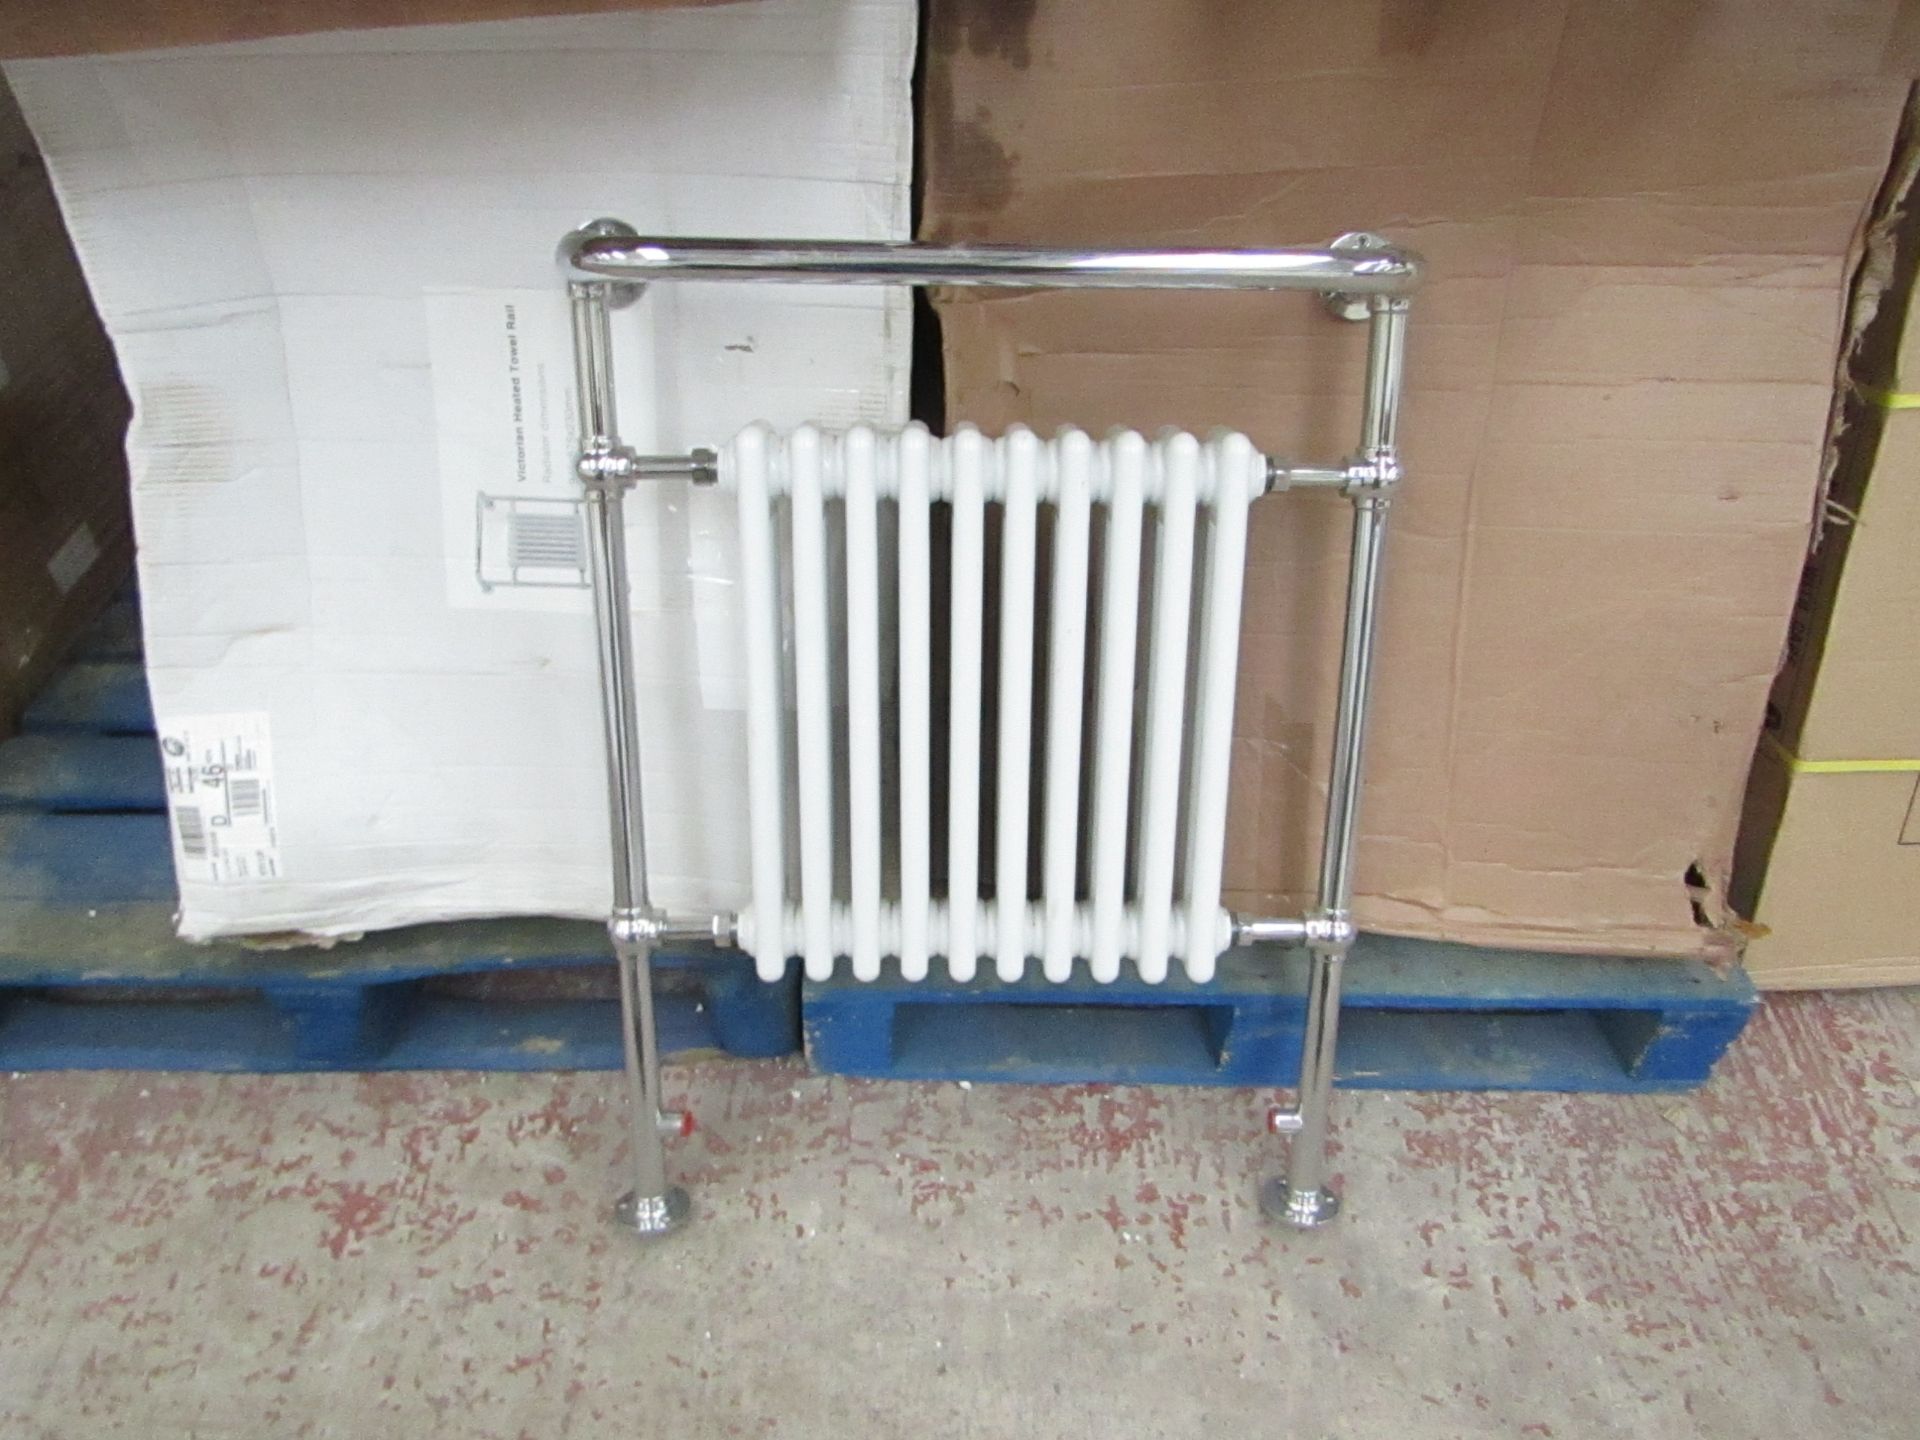 Old London 10 section traditional radiator, unchecked and boxed, 70cm W x 93cm T x 24cm D